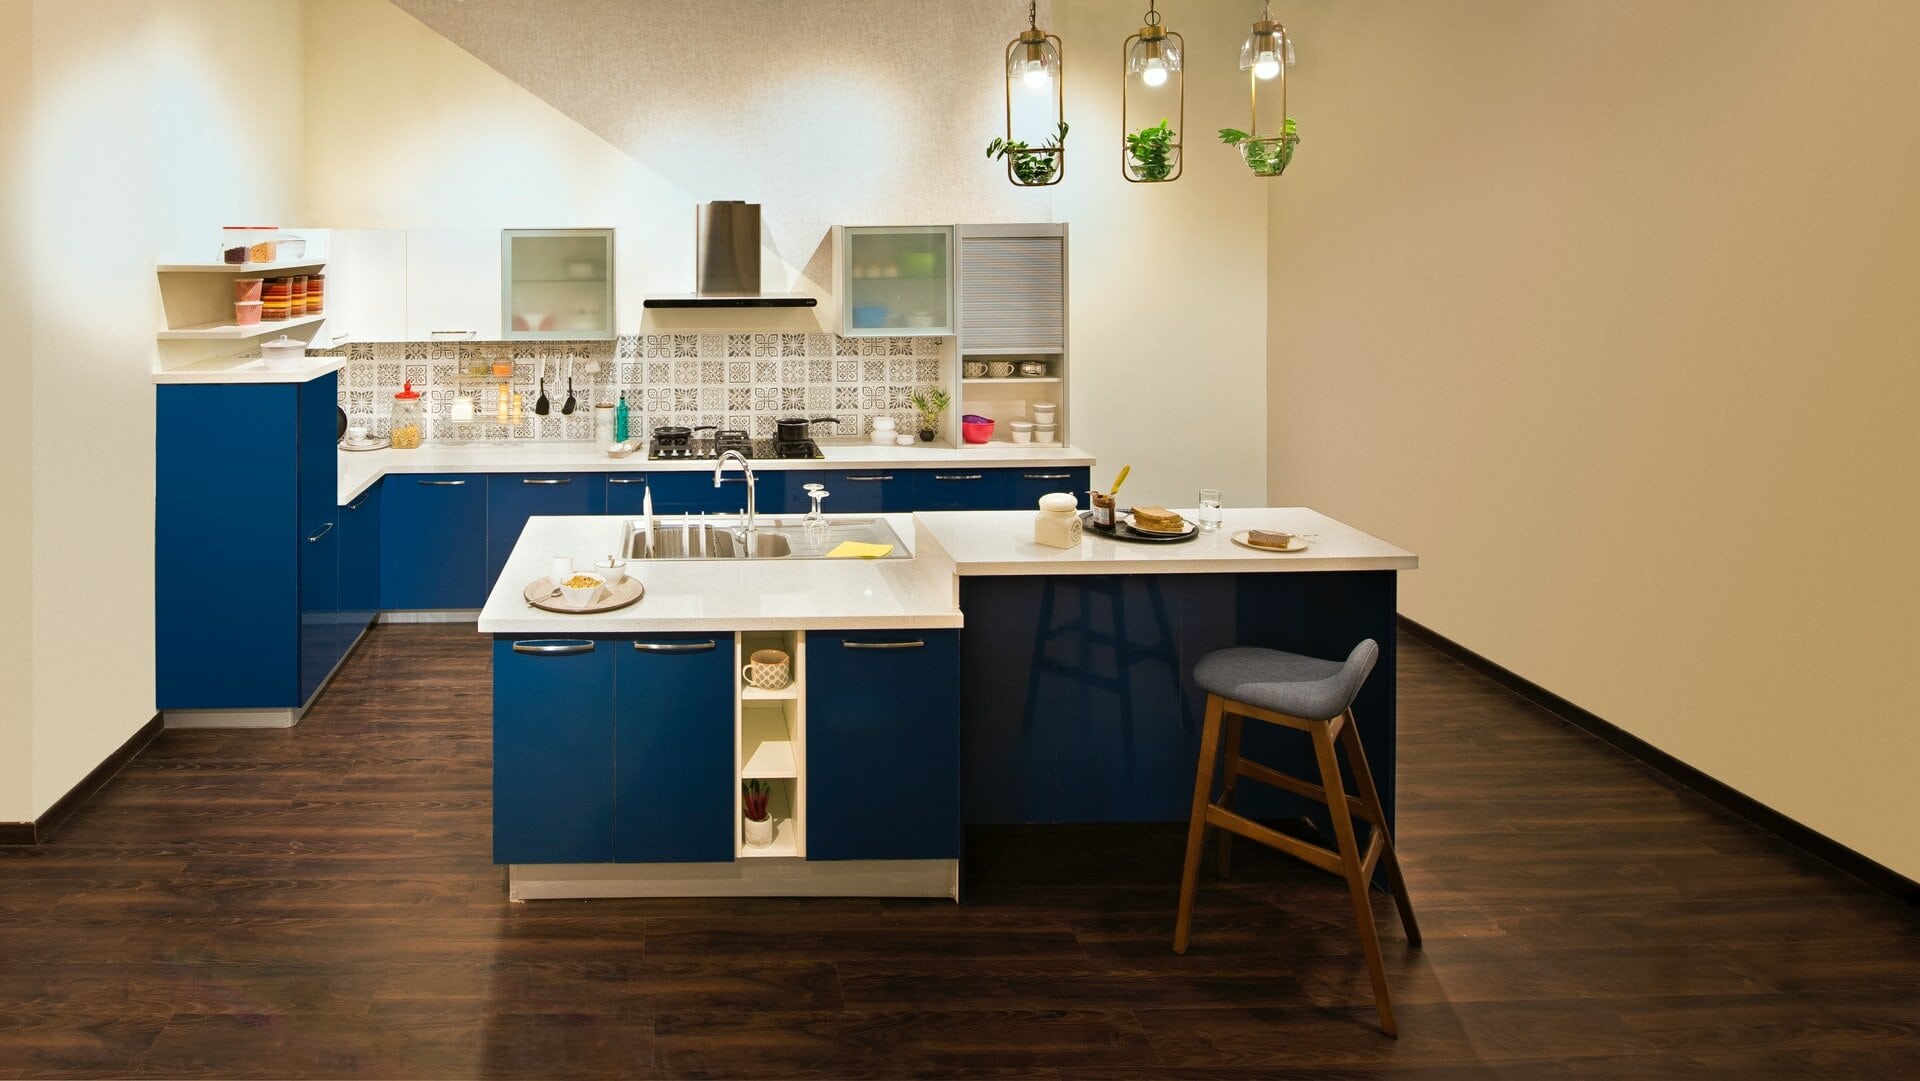  Create a Retro Kitchen with Royal Blue Lowers